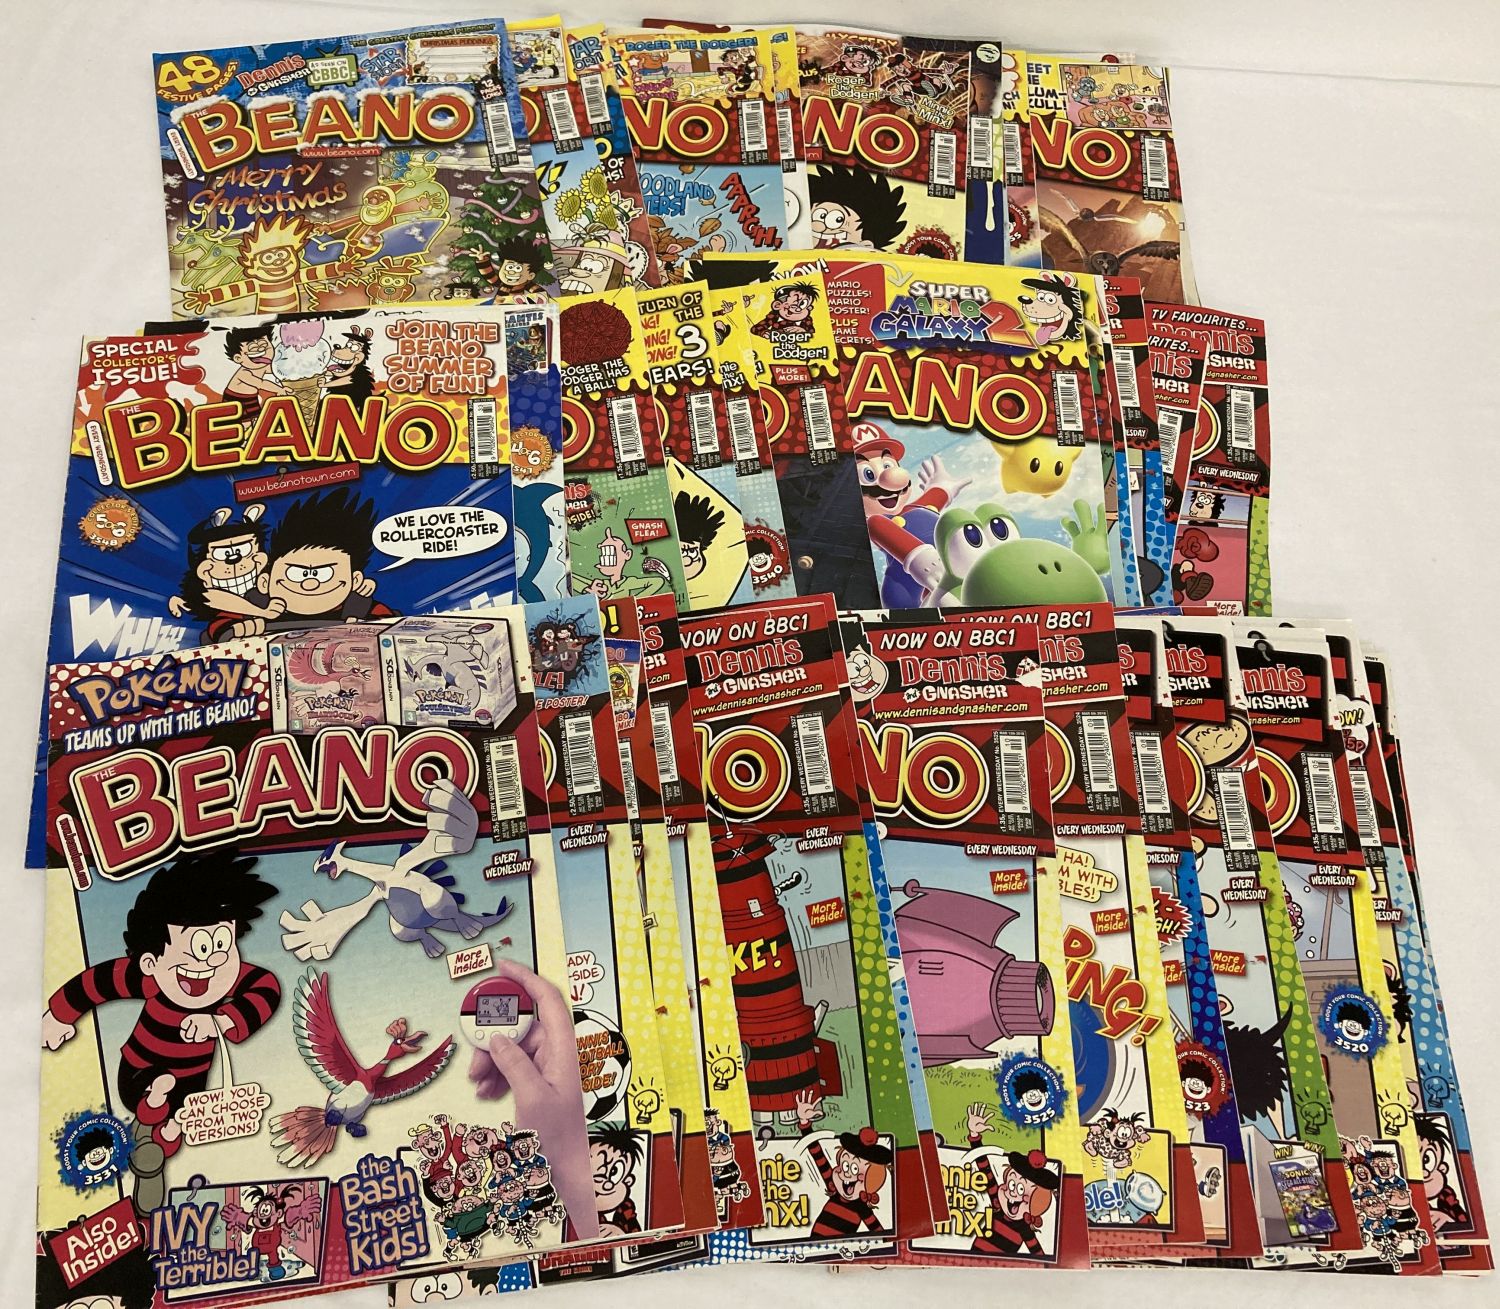 47 issues of The Beano comic, all dating from 2010.